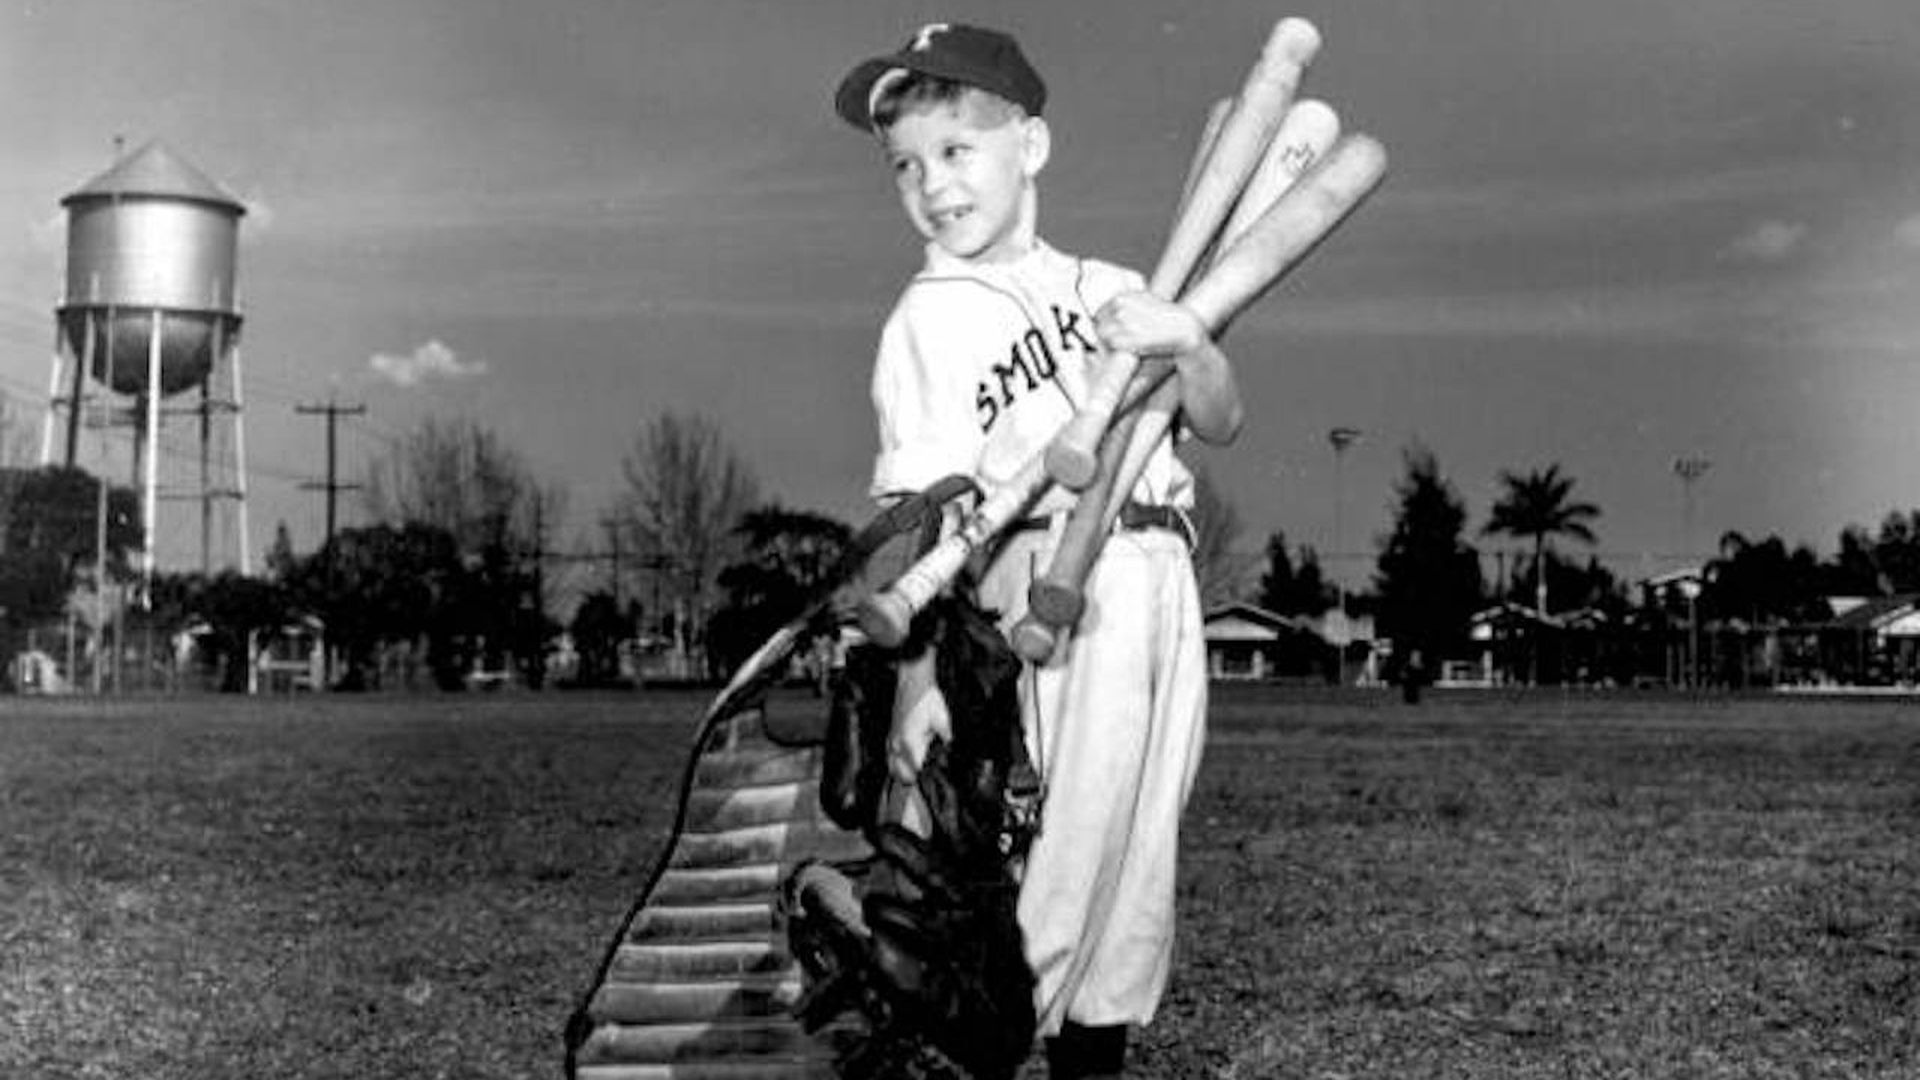 black and white photo of a child holding bats in a  Smokers uniform